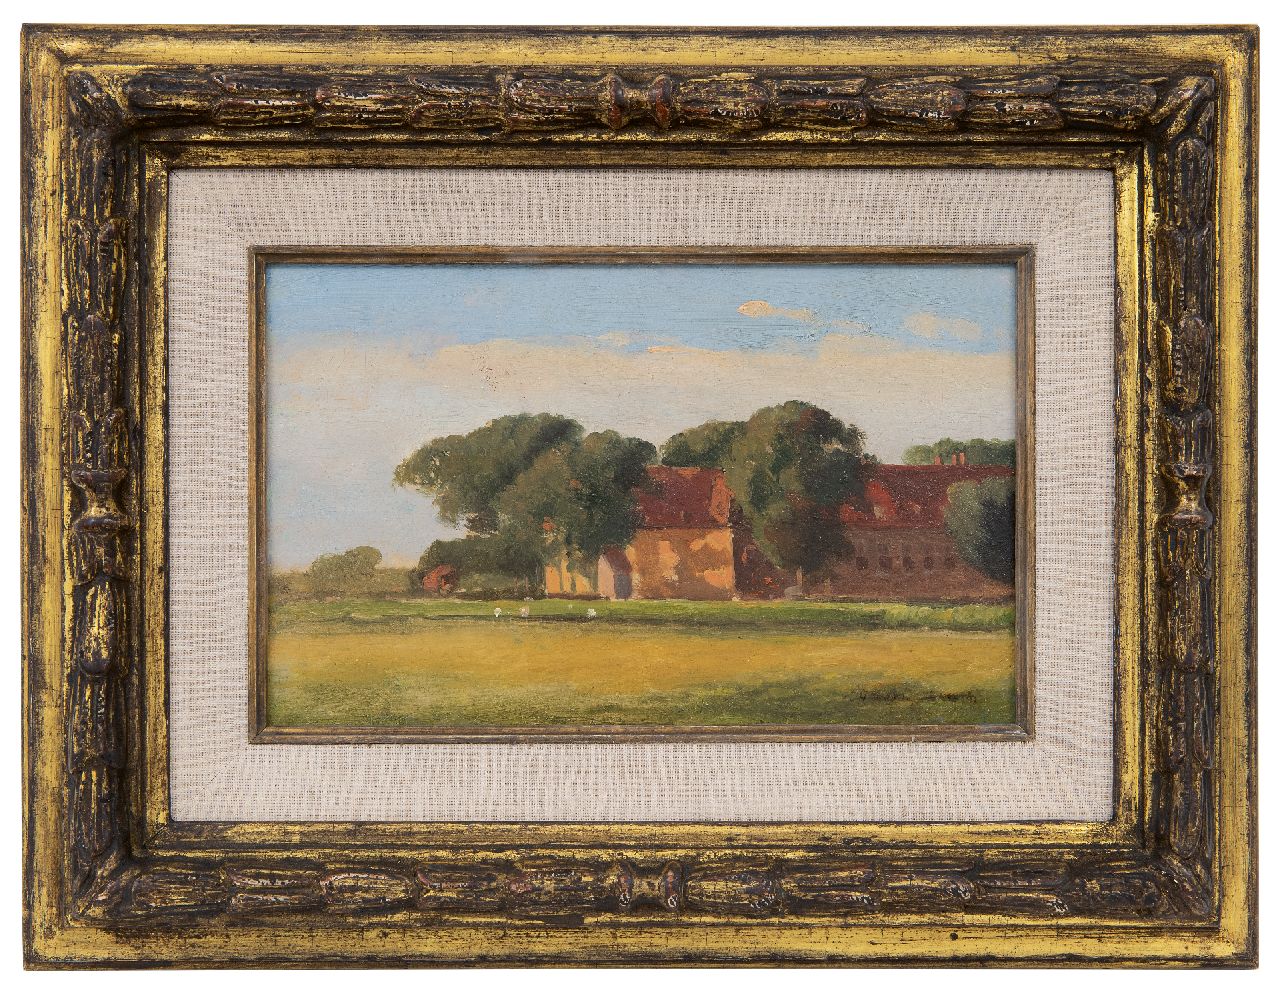 Weissenbruch H.J.  | Hendrik Johannes 'J.H.' Weissenbruch | Paintings offered for sale | Landscape - sketch, oil on painter's board 17.9 x 28.3 cm, signed l.r.